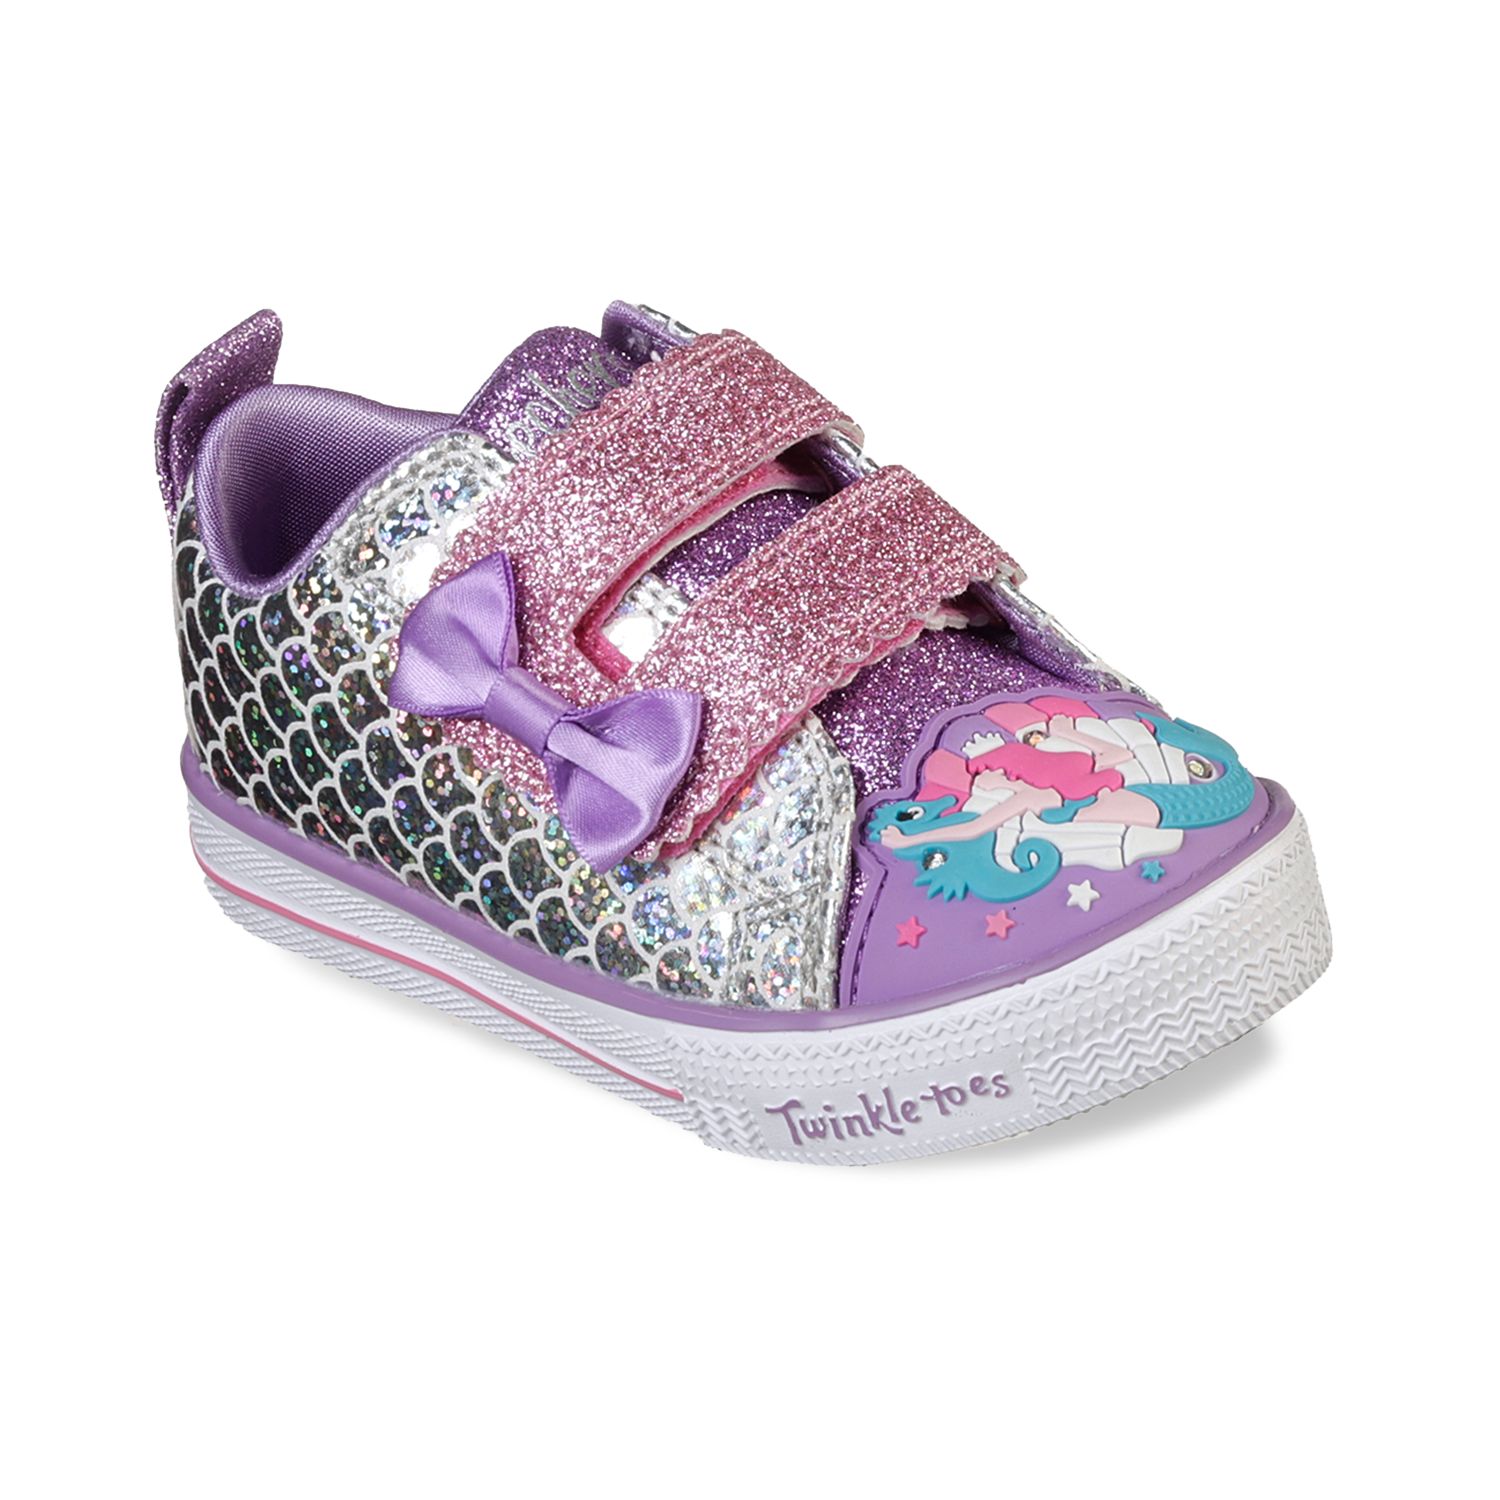 mermaid light up shoes